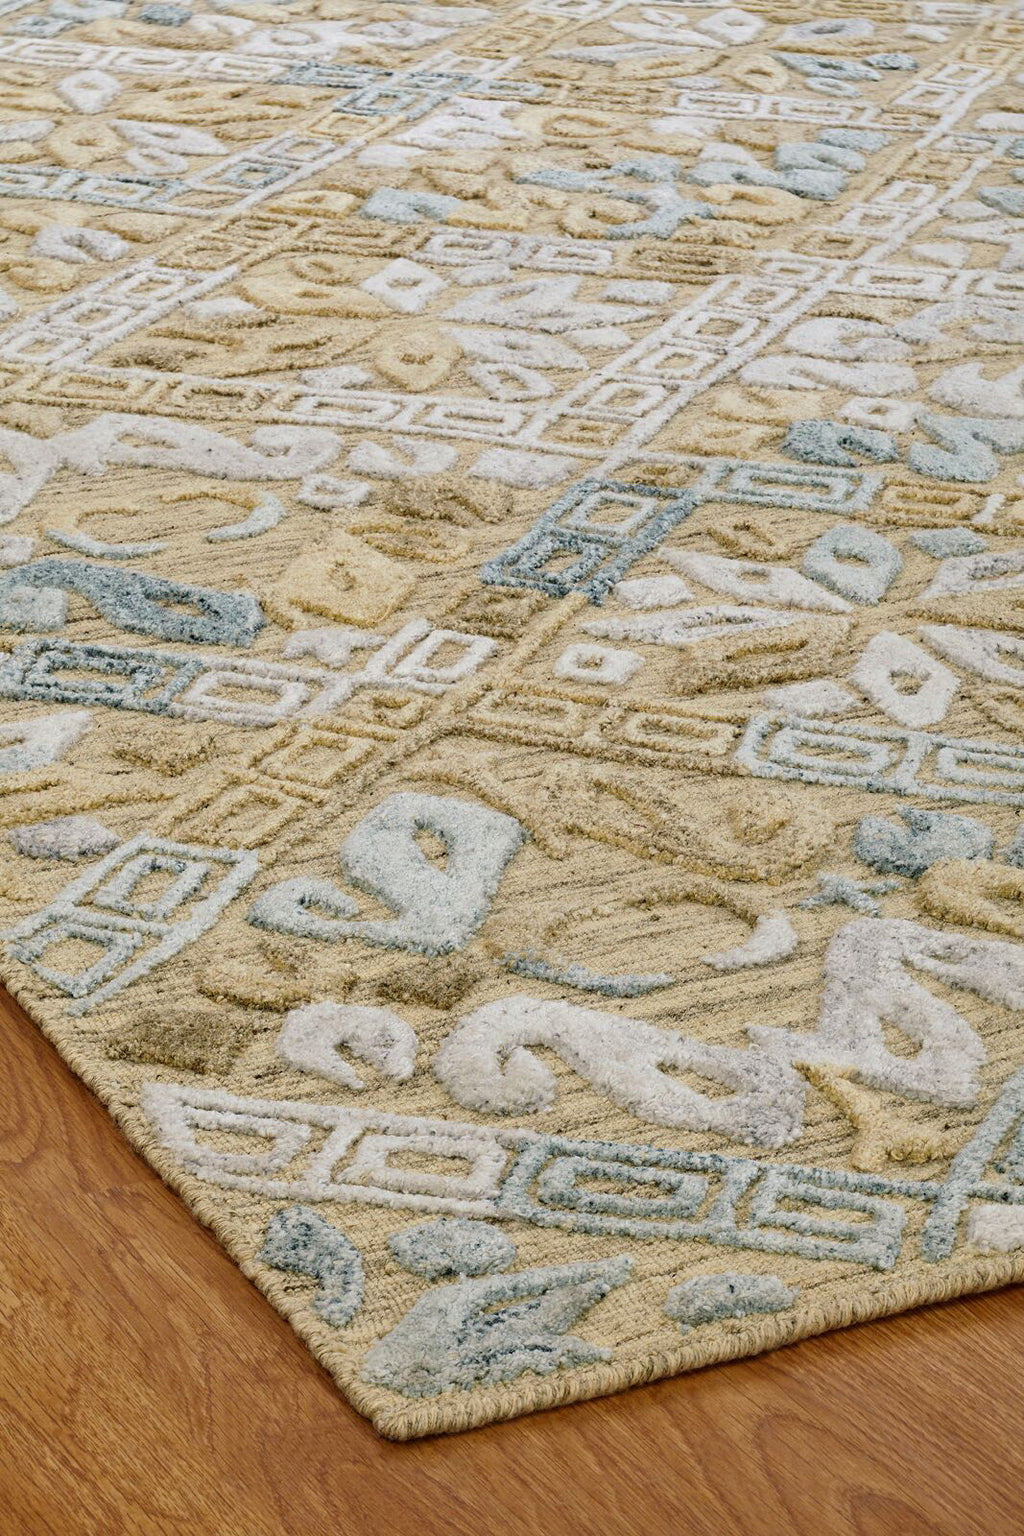 Ancient Boundaries Tunis TUN-10 Gold Area Rug Lifestyle Image Feature